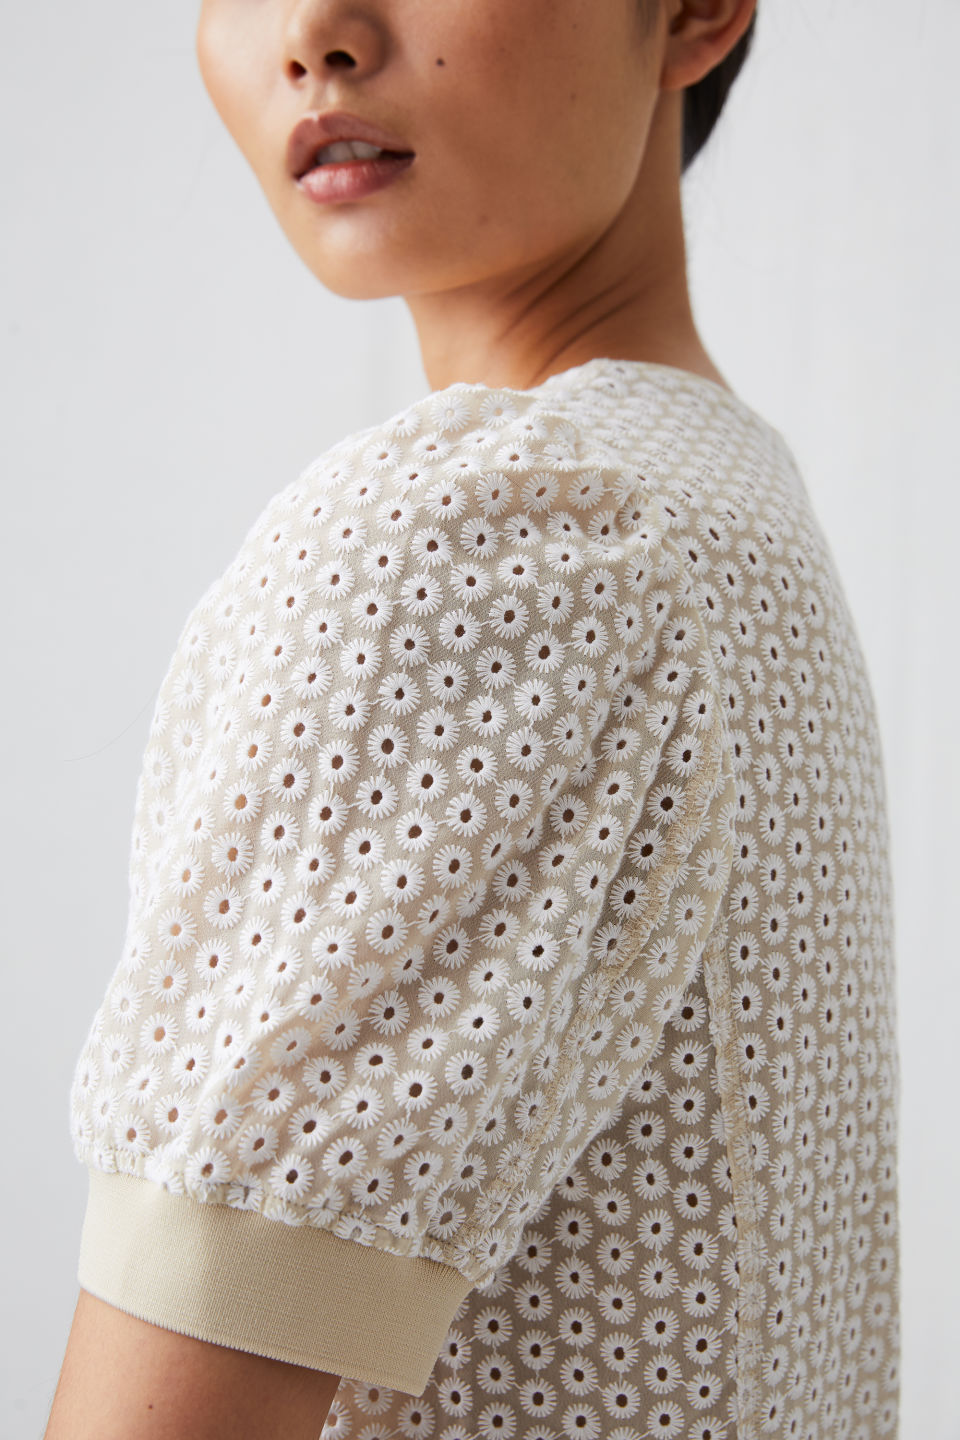 arket-embroidered-top-detail